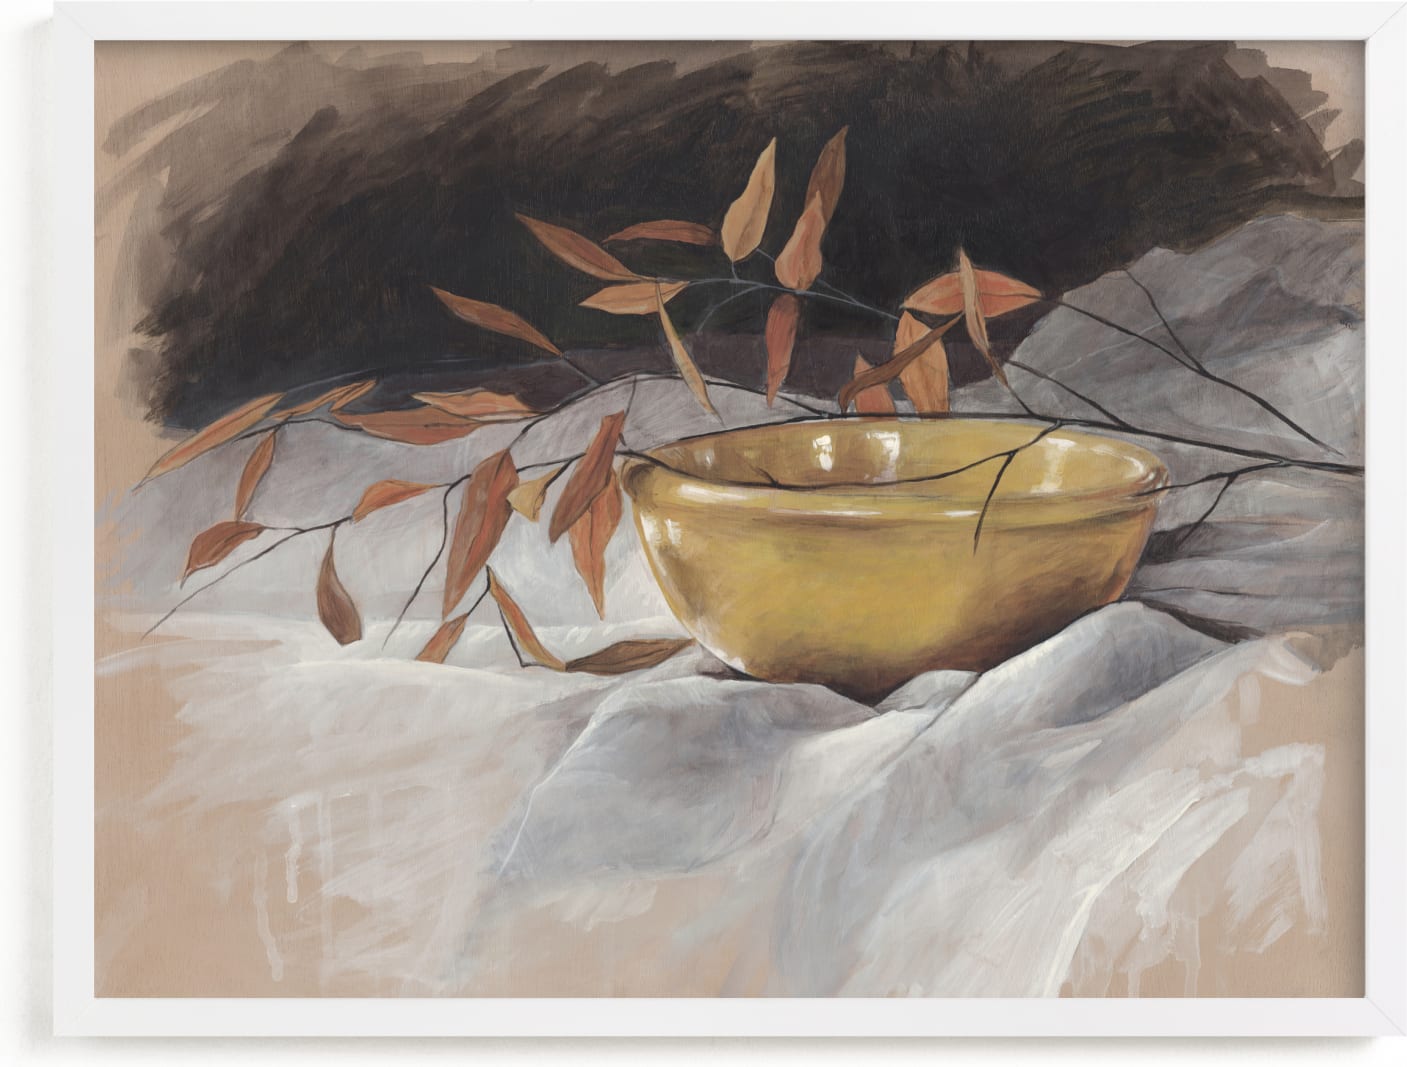 This is a brown art by Lorent and Leif called Yellow Bowl.